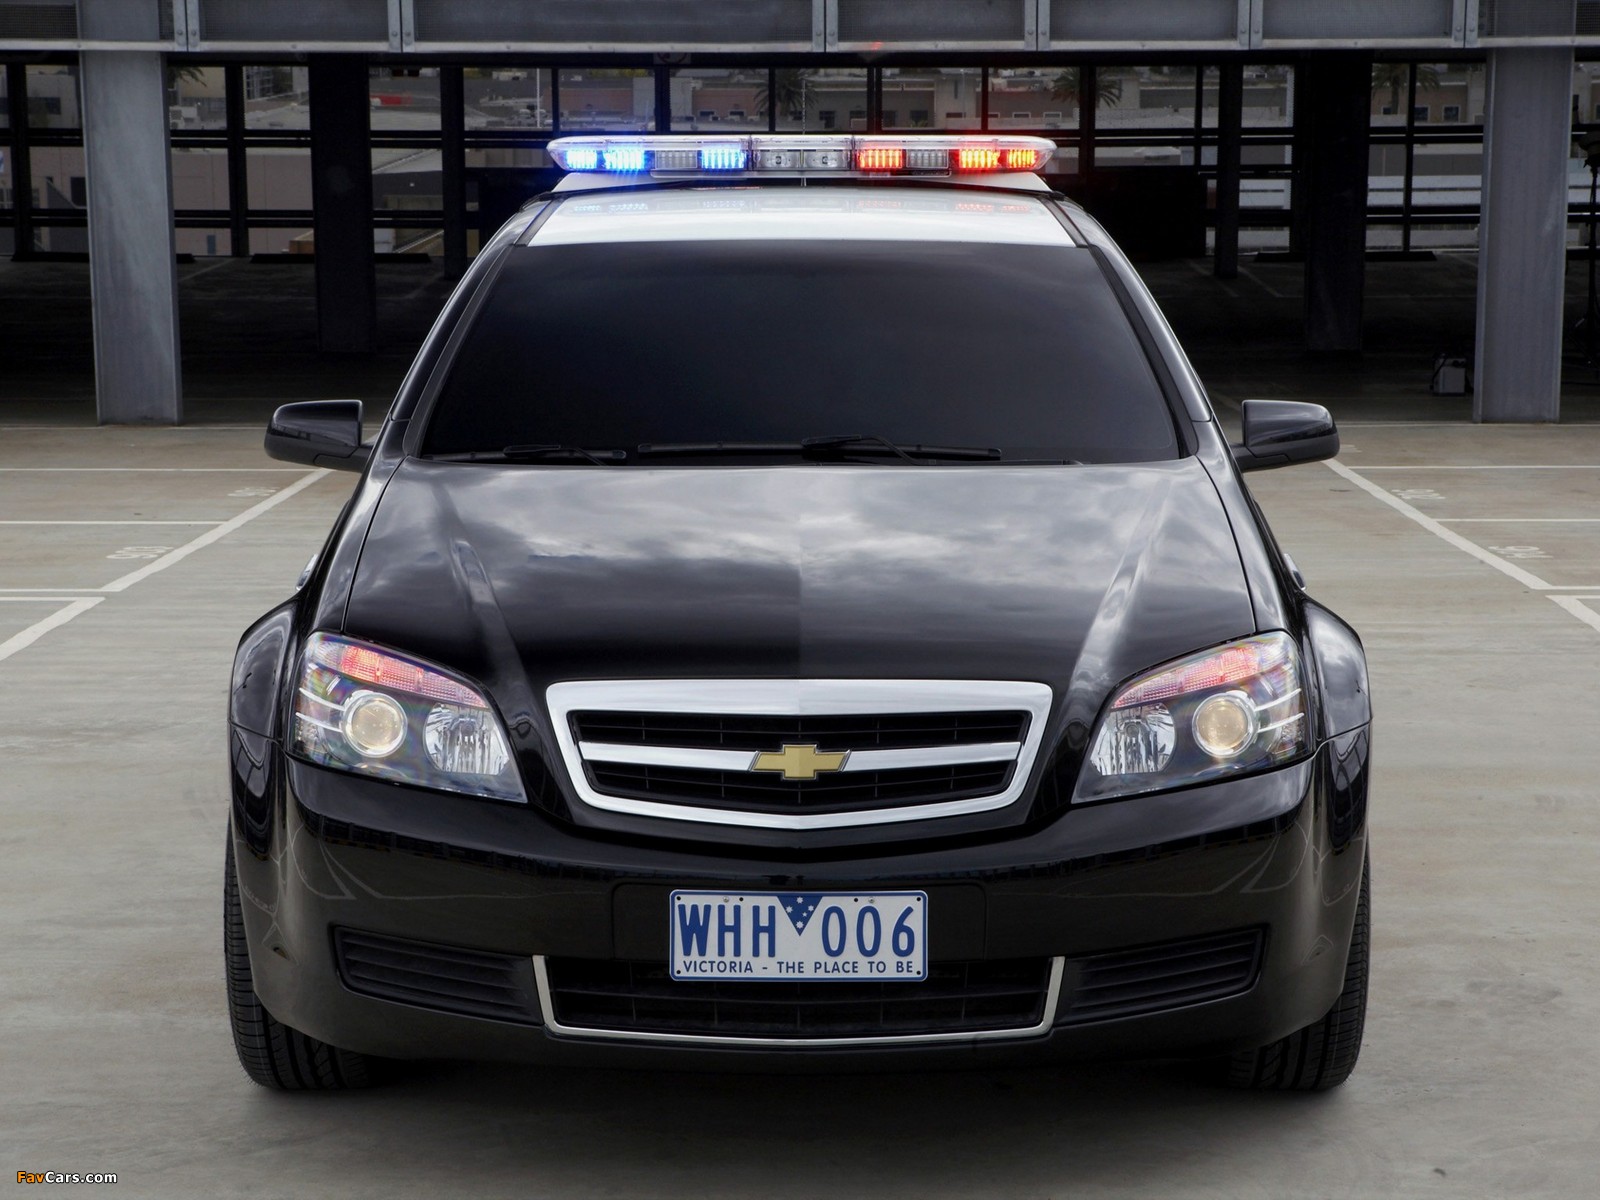 Chevrolet Caprice Police Patrol Vehicle 2010 wallpapers (1600 x 1200)